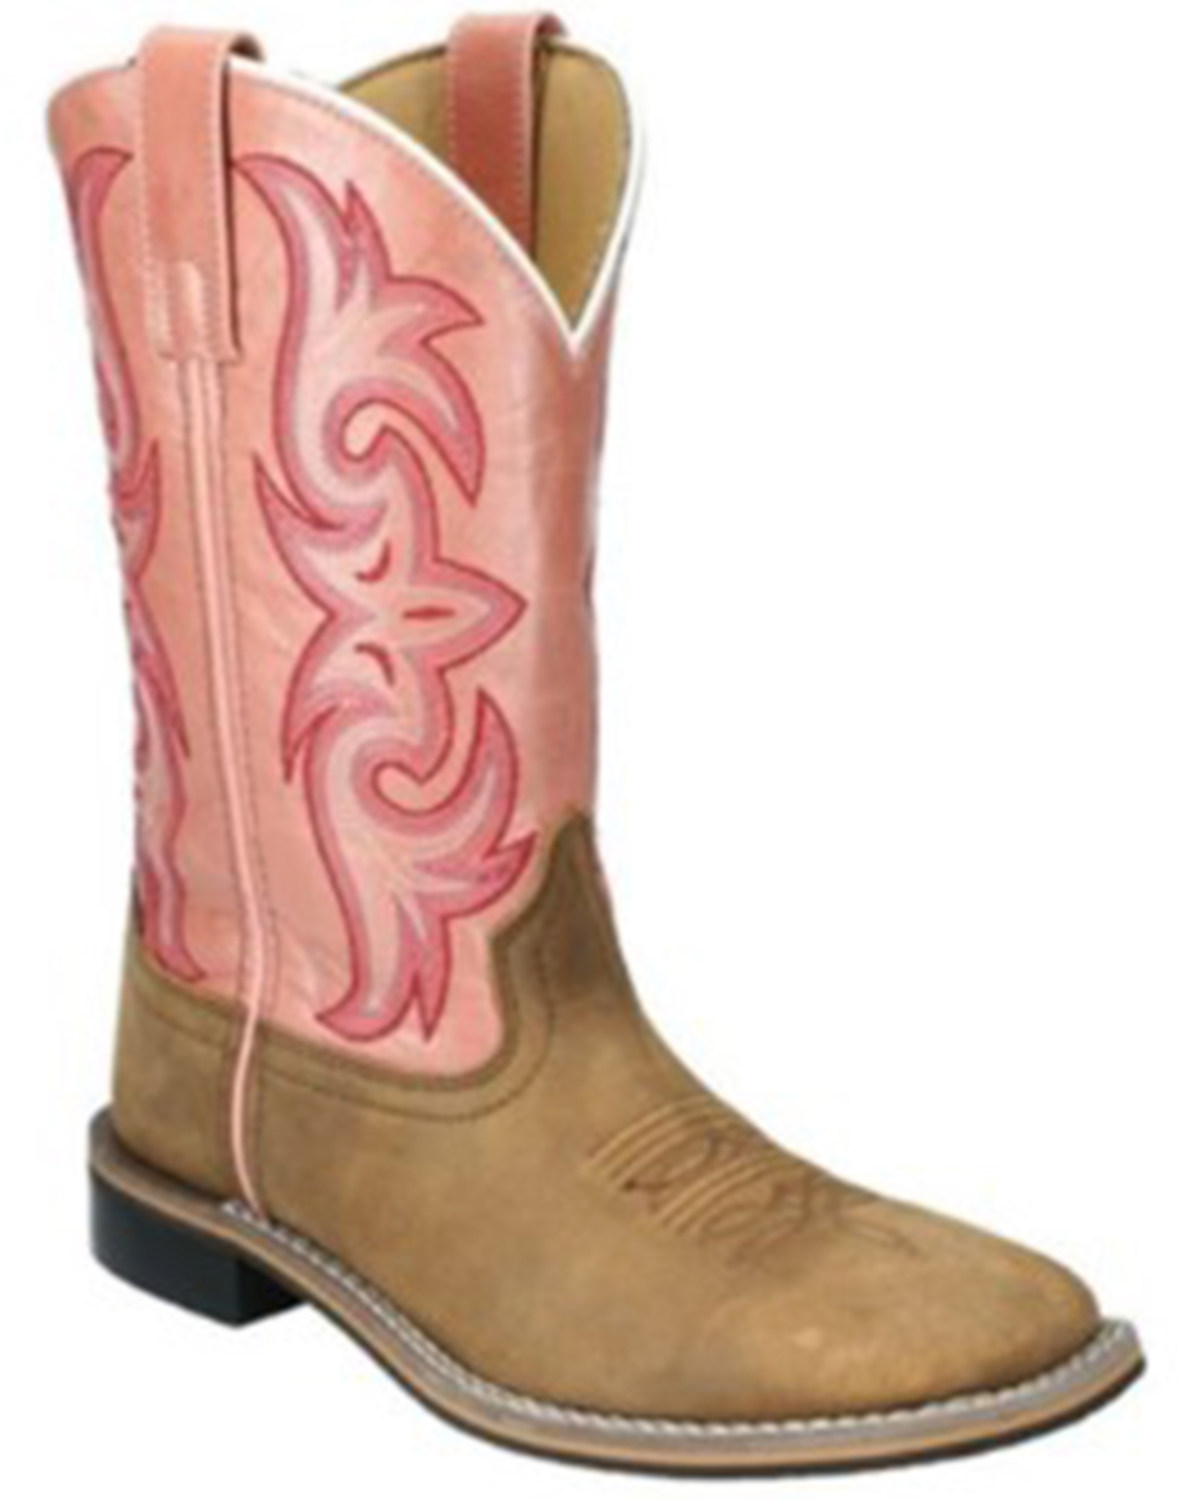 Smoky Mountain Women's Olivia Western Boots - Broad Square Toe